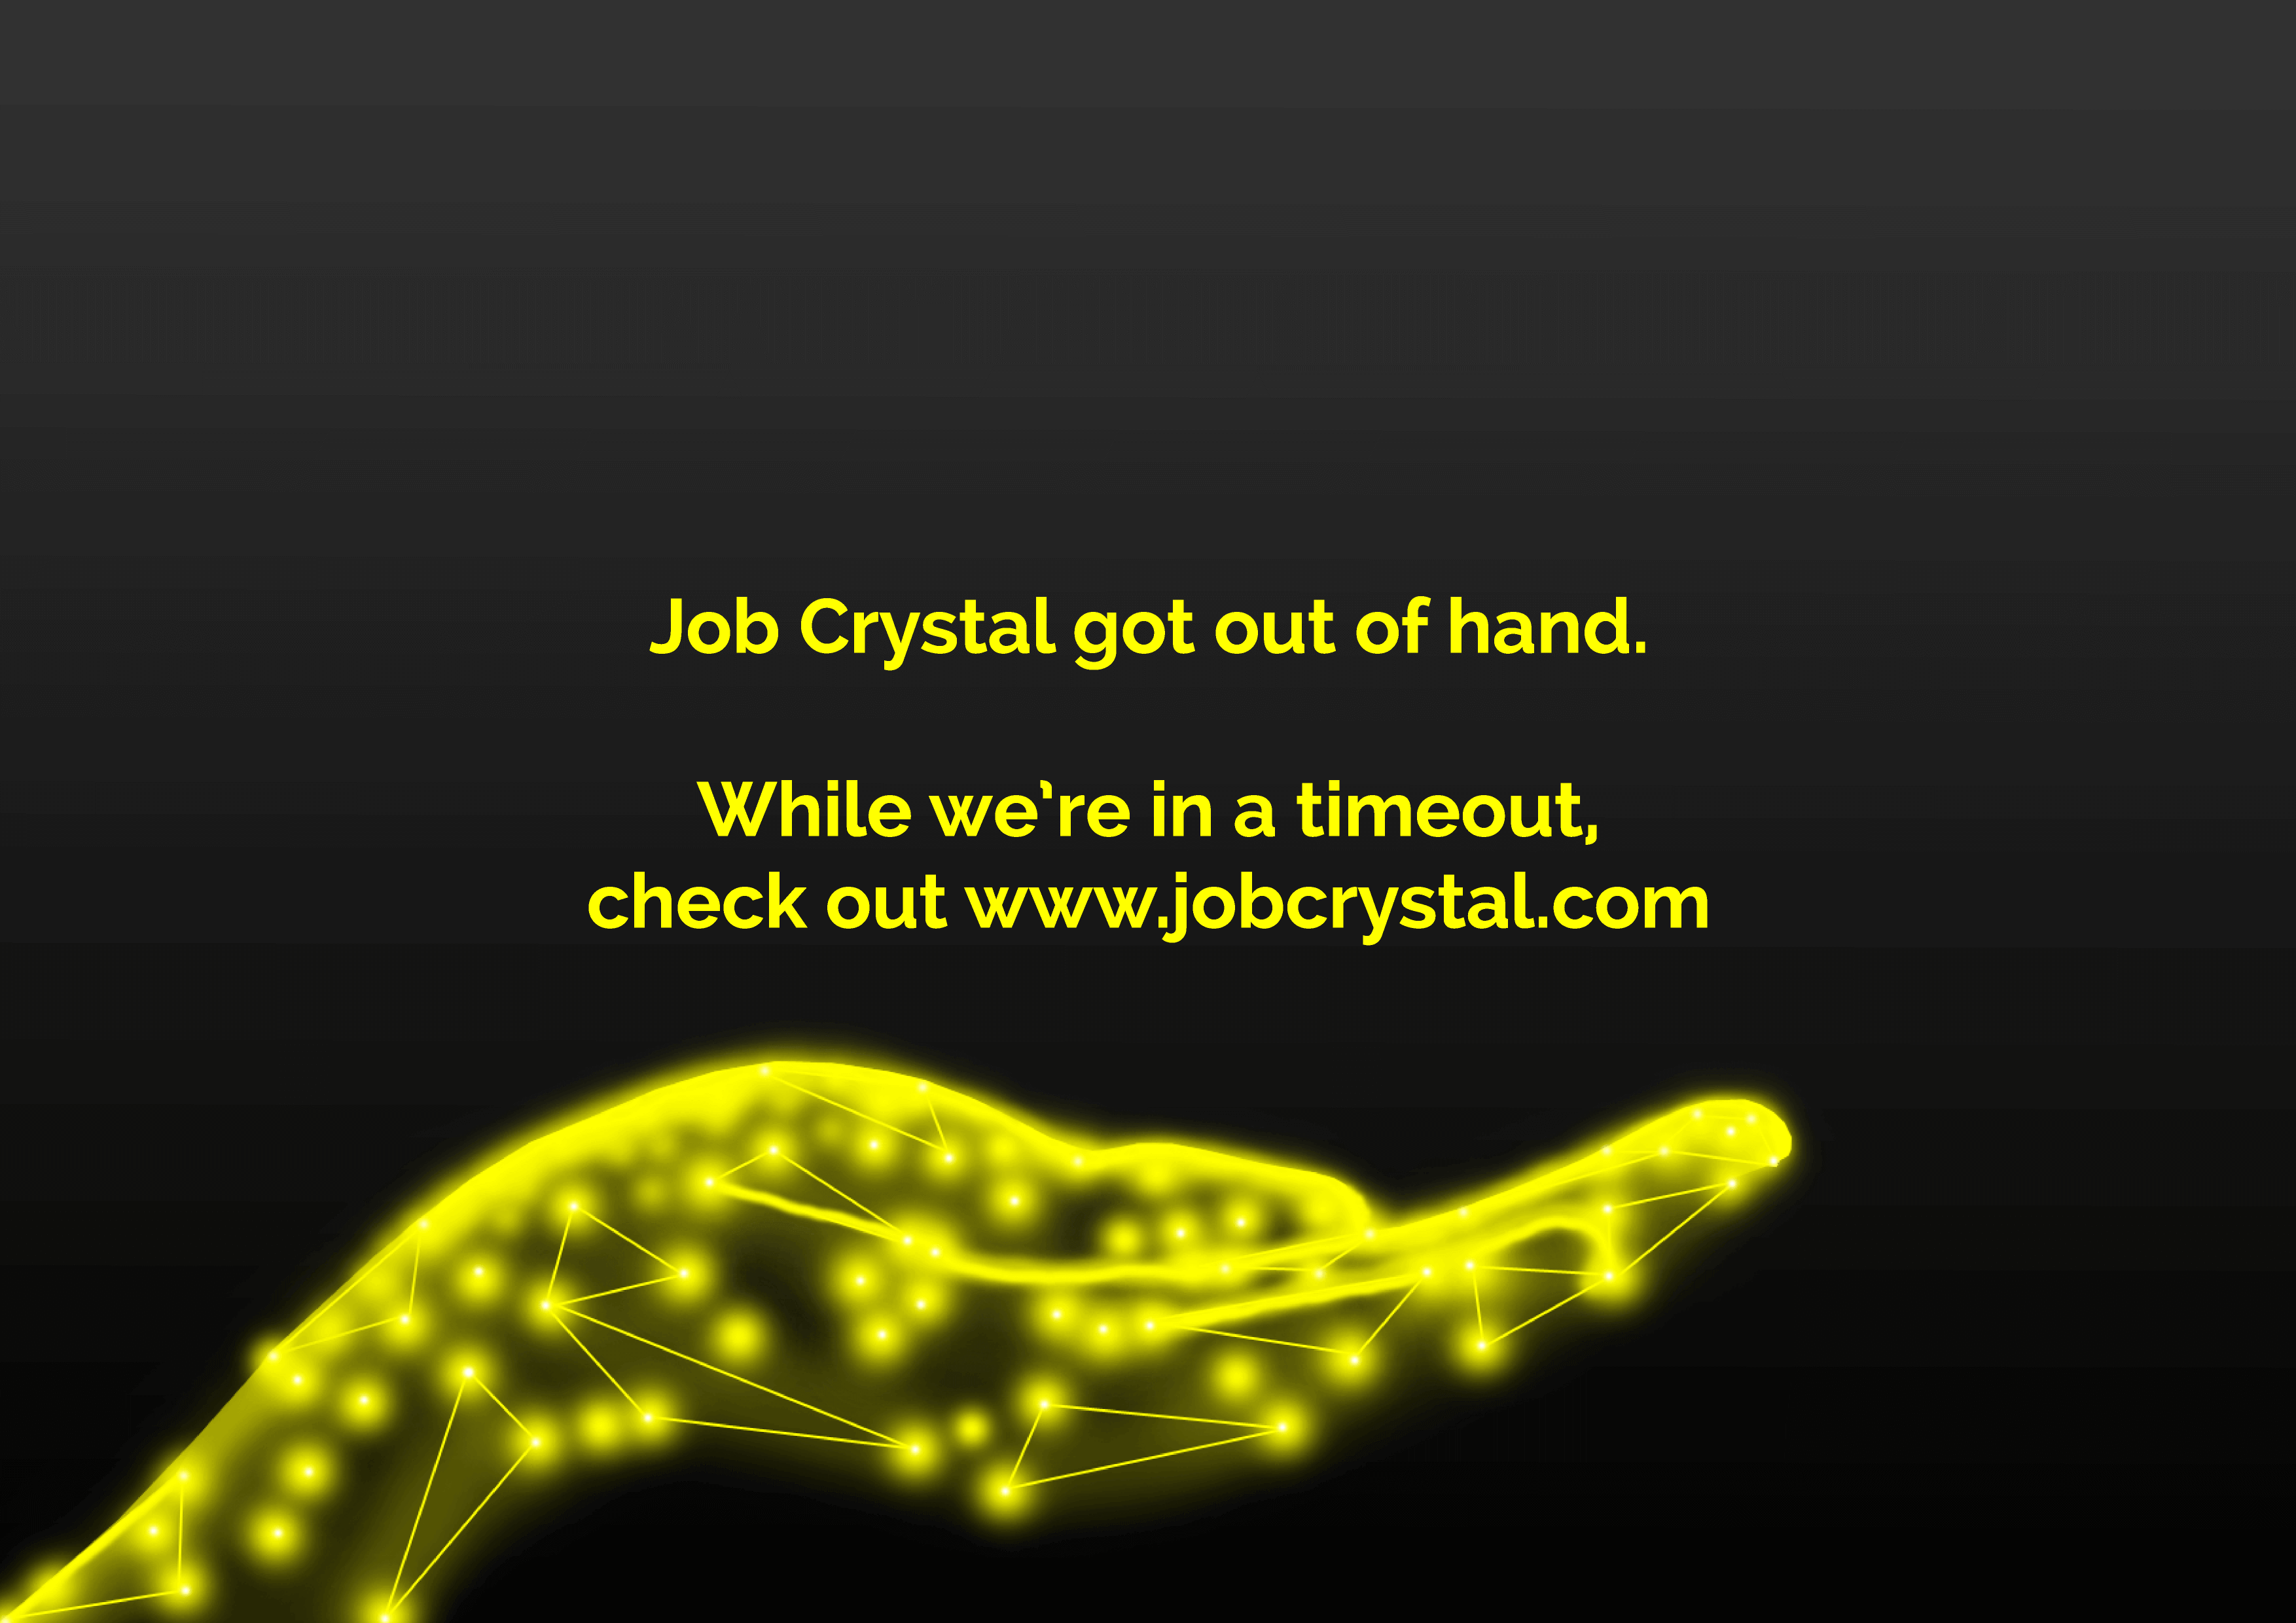 Job Crystal got out of hand. While we're in a timeout check out www.jobcrystal.com